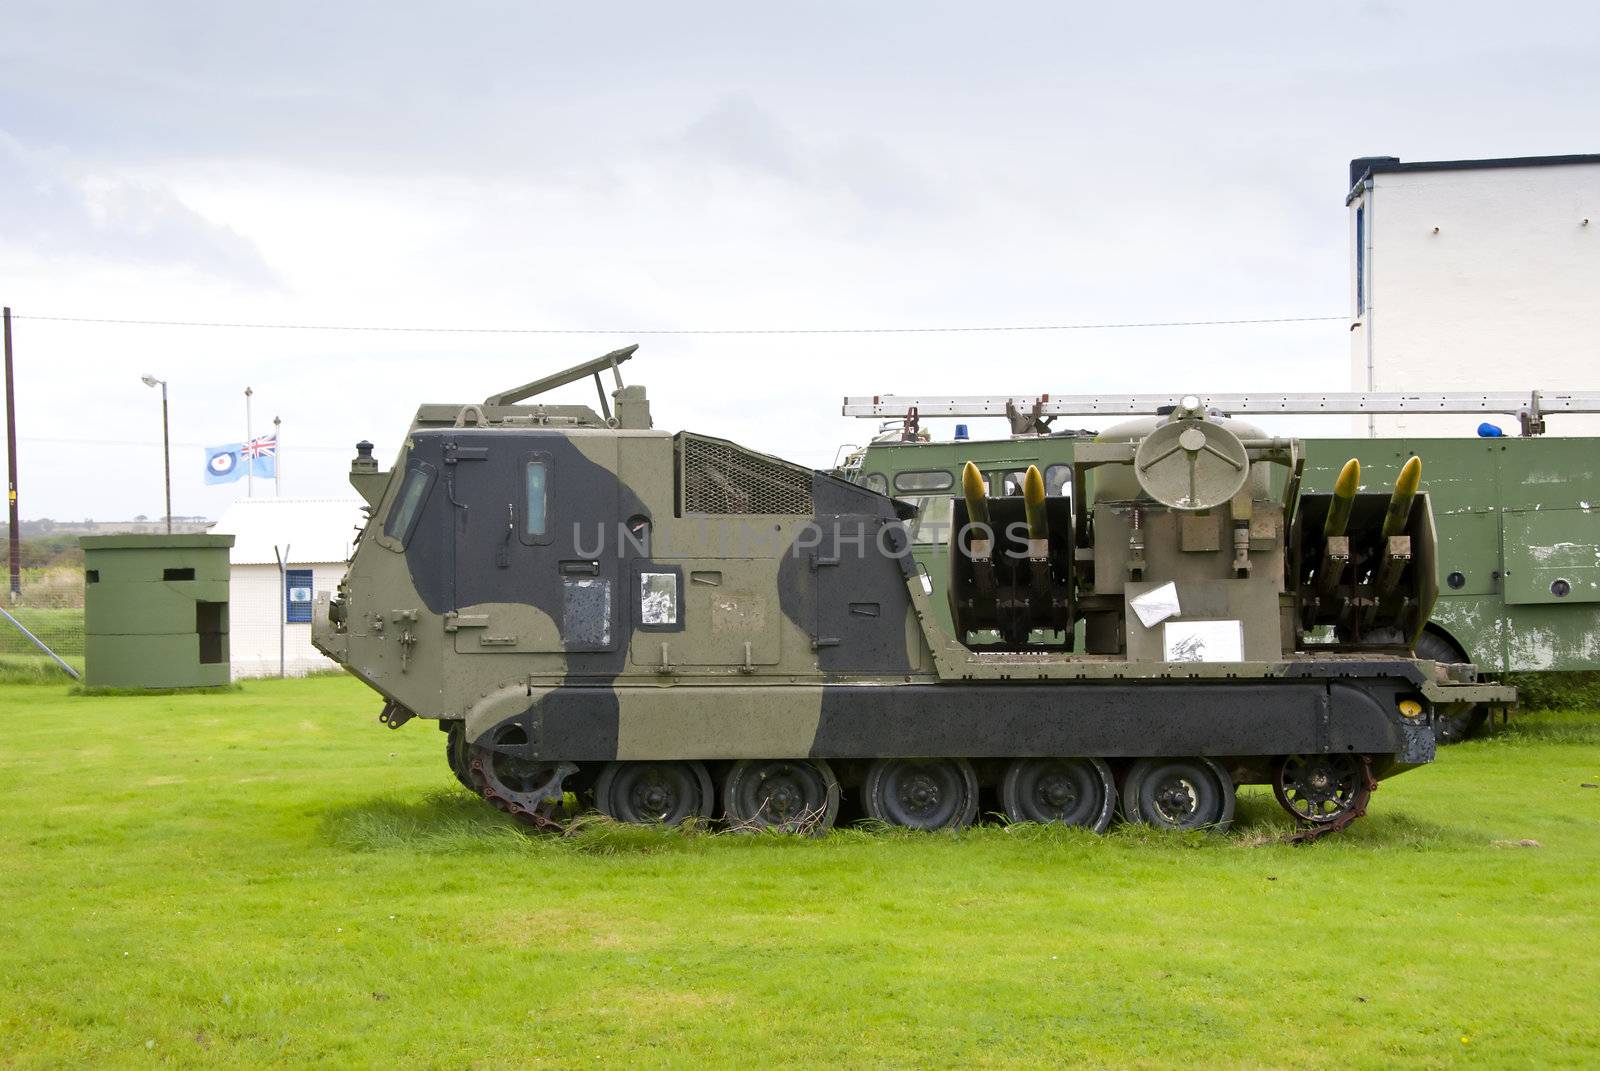 Tracked Missile Launching Vehicle by d40xboy